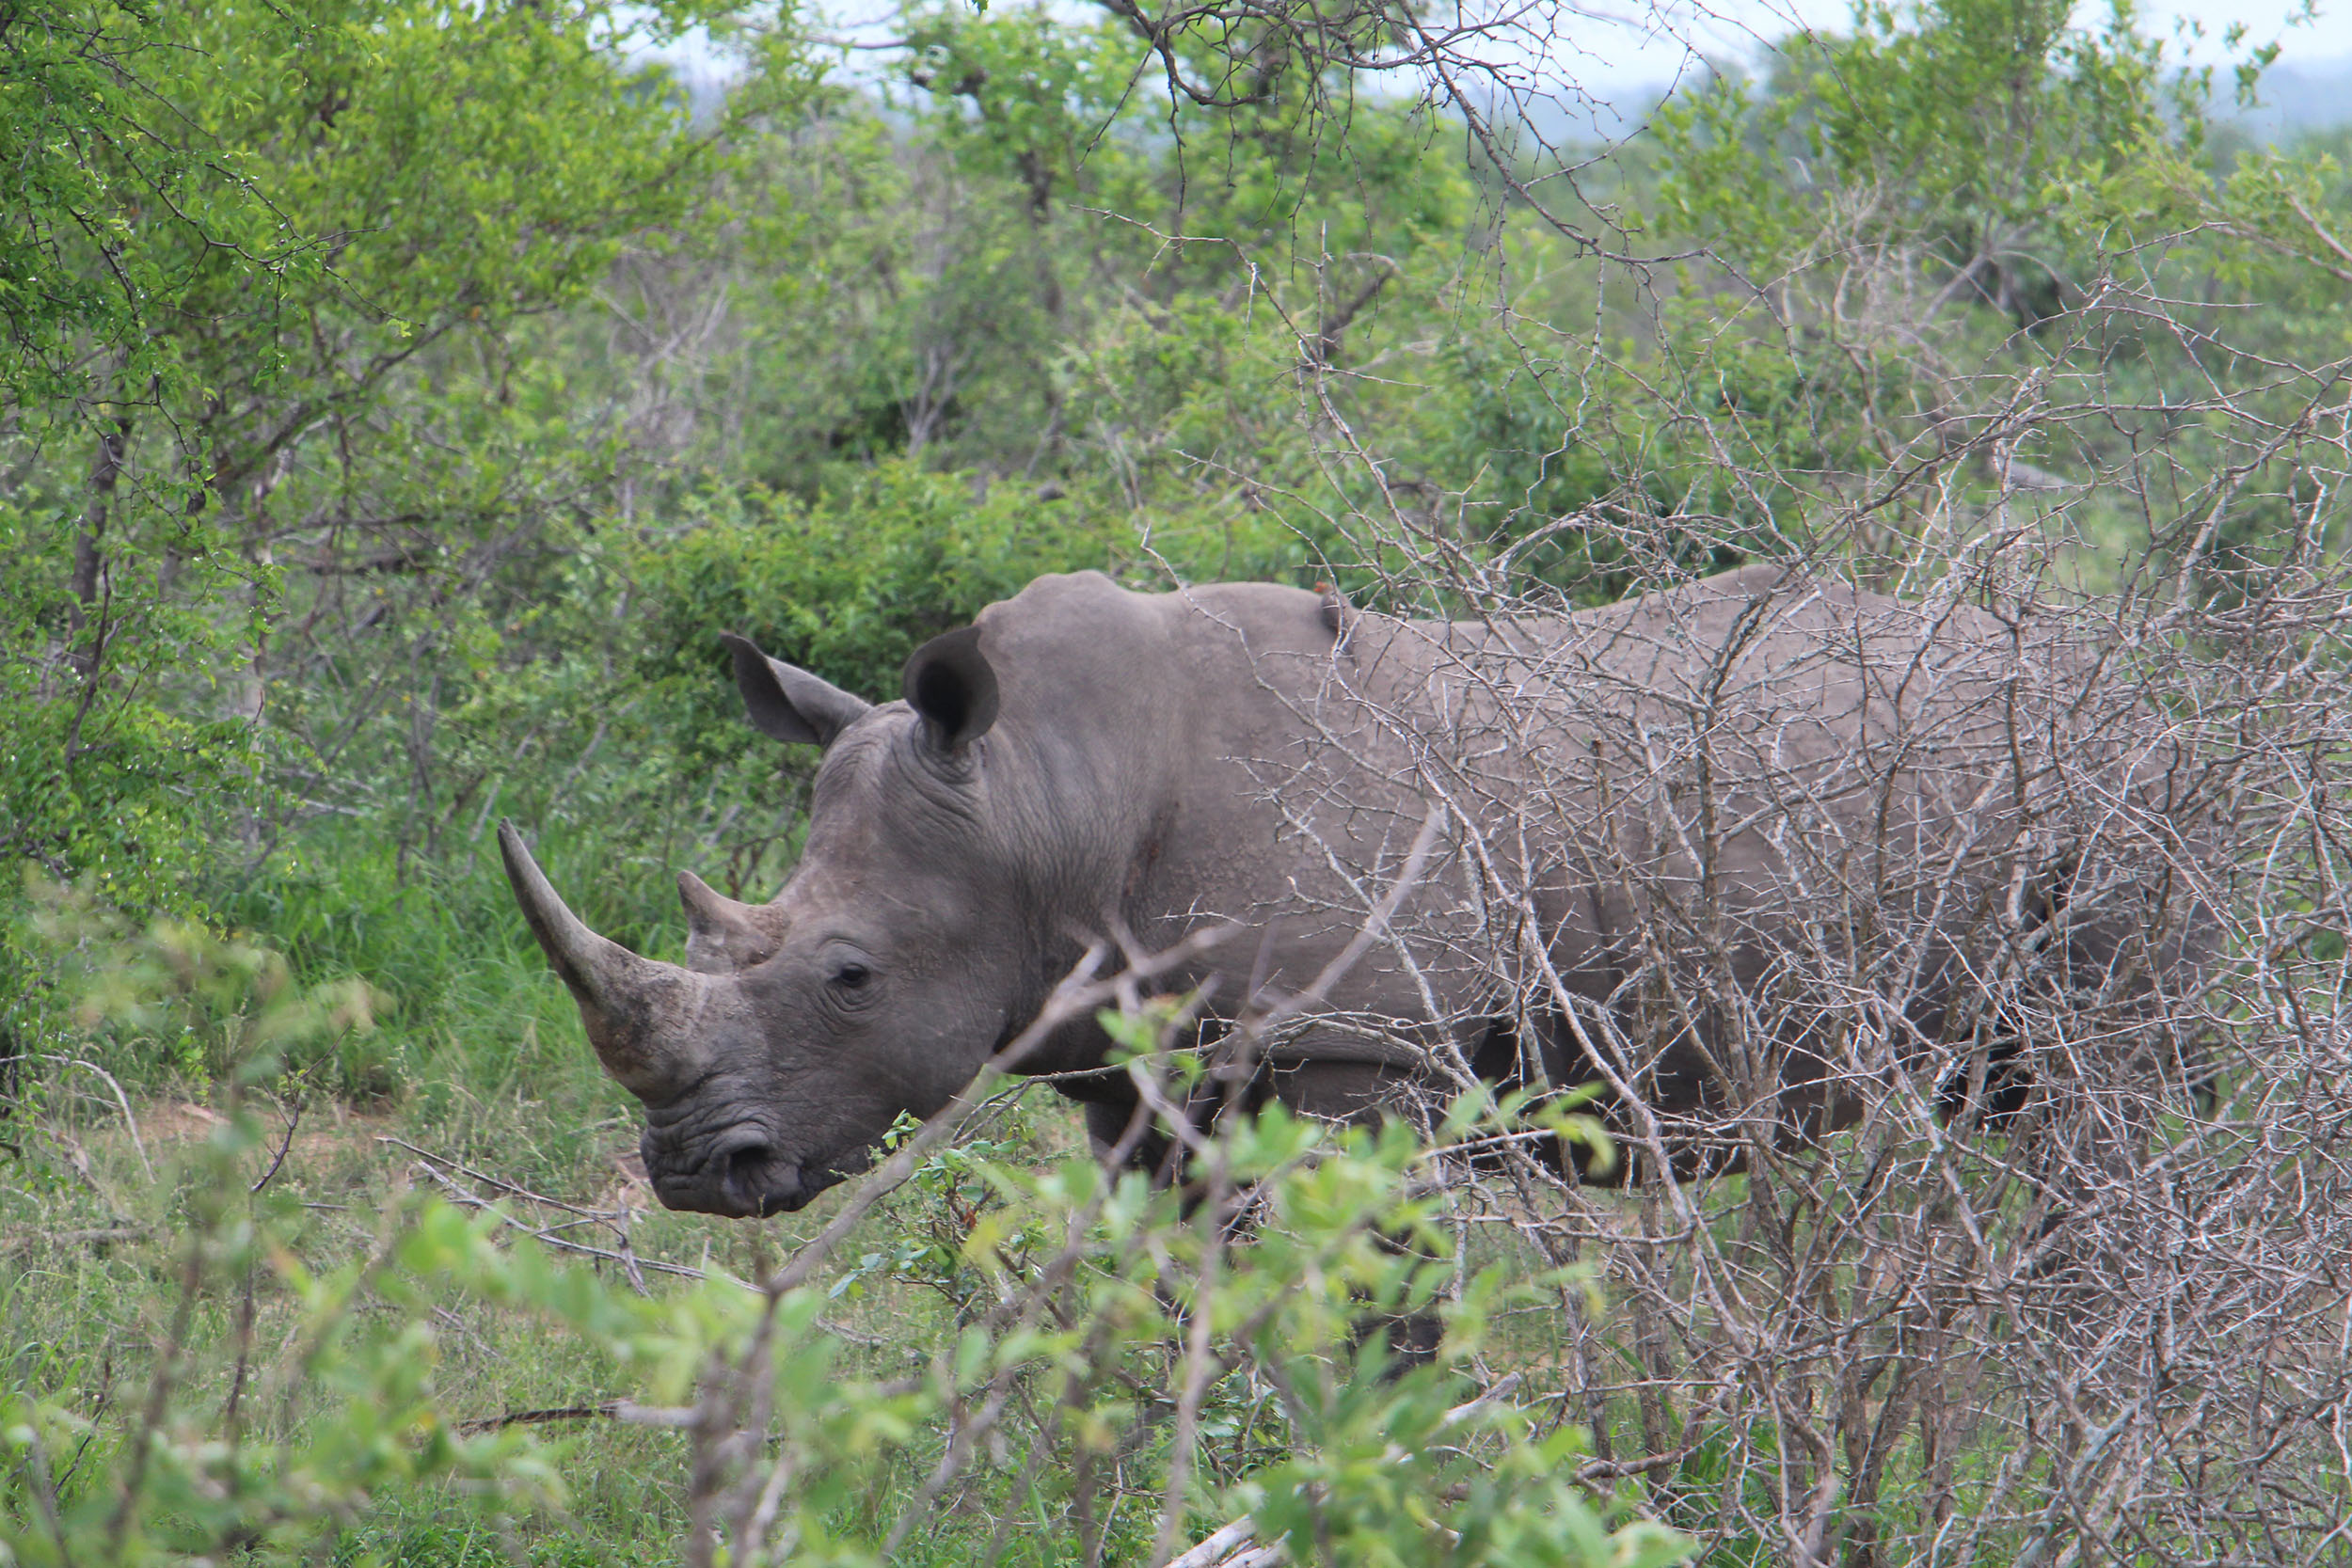 The students had the unusual treat of seeing all of the “big five” animals in Kruger National Park, including a rhinoceros.